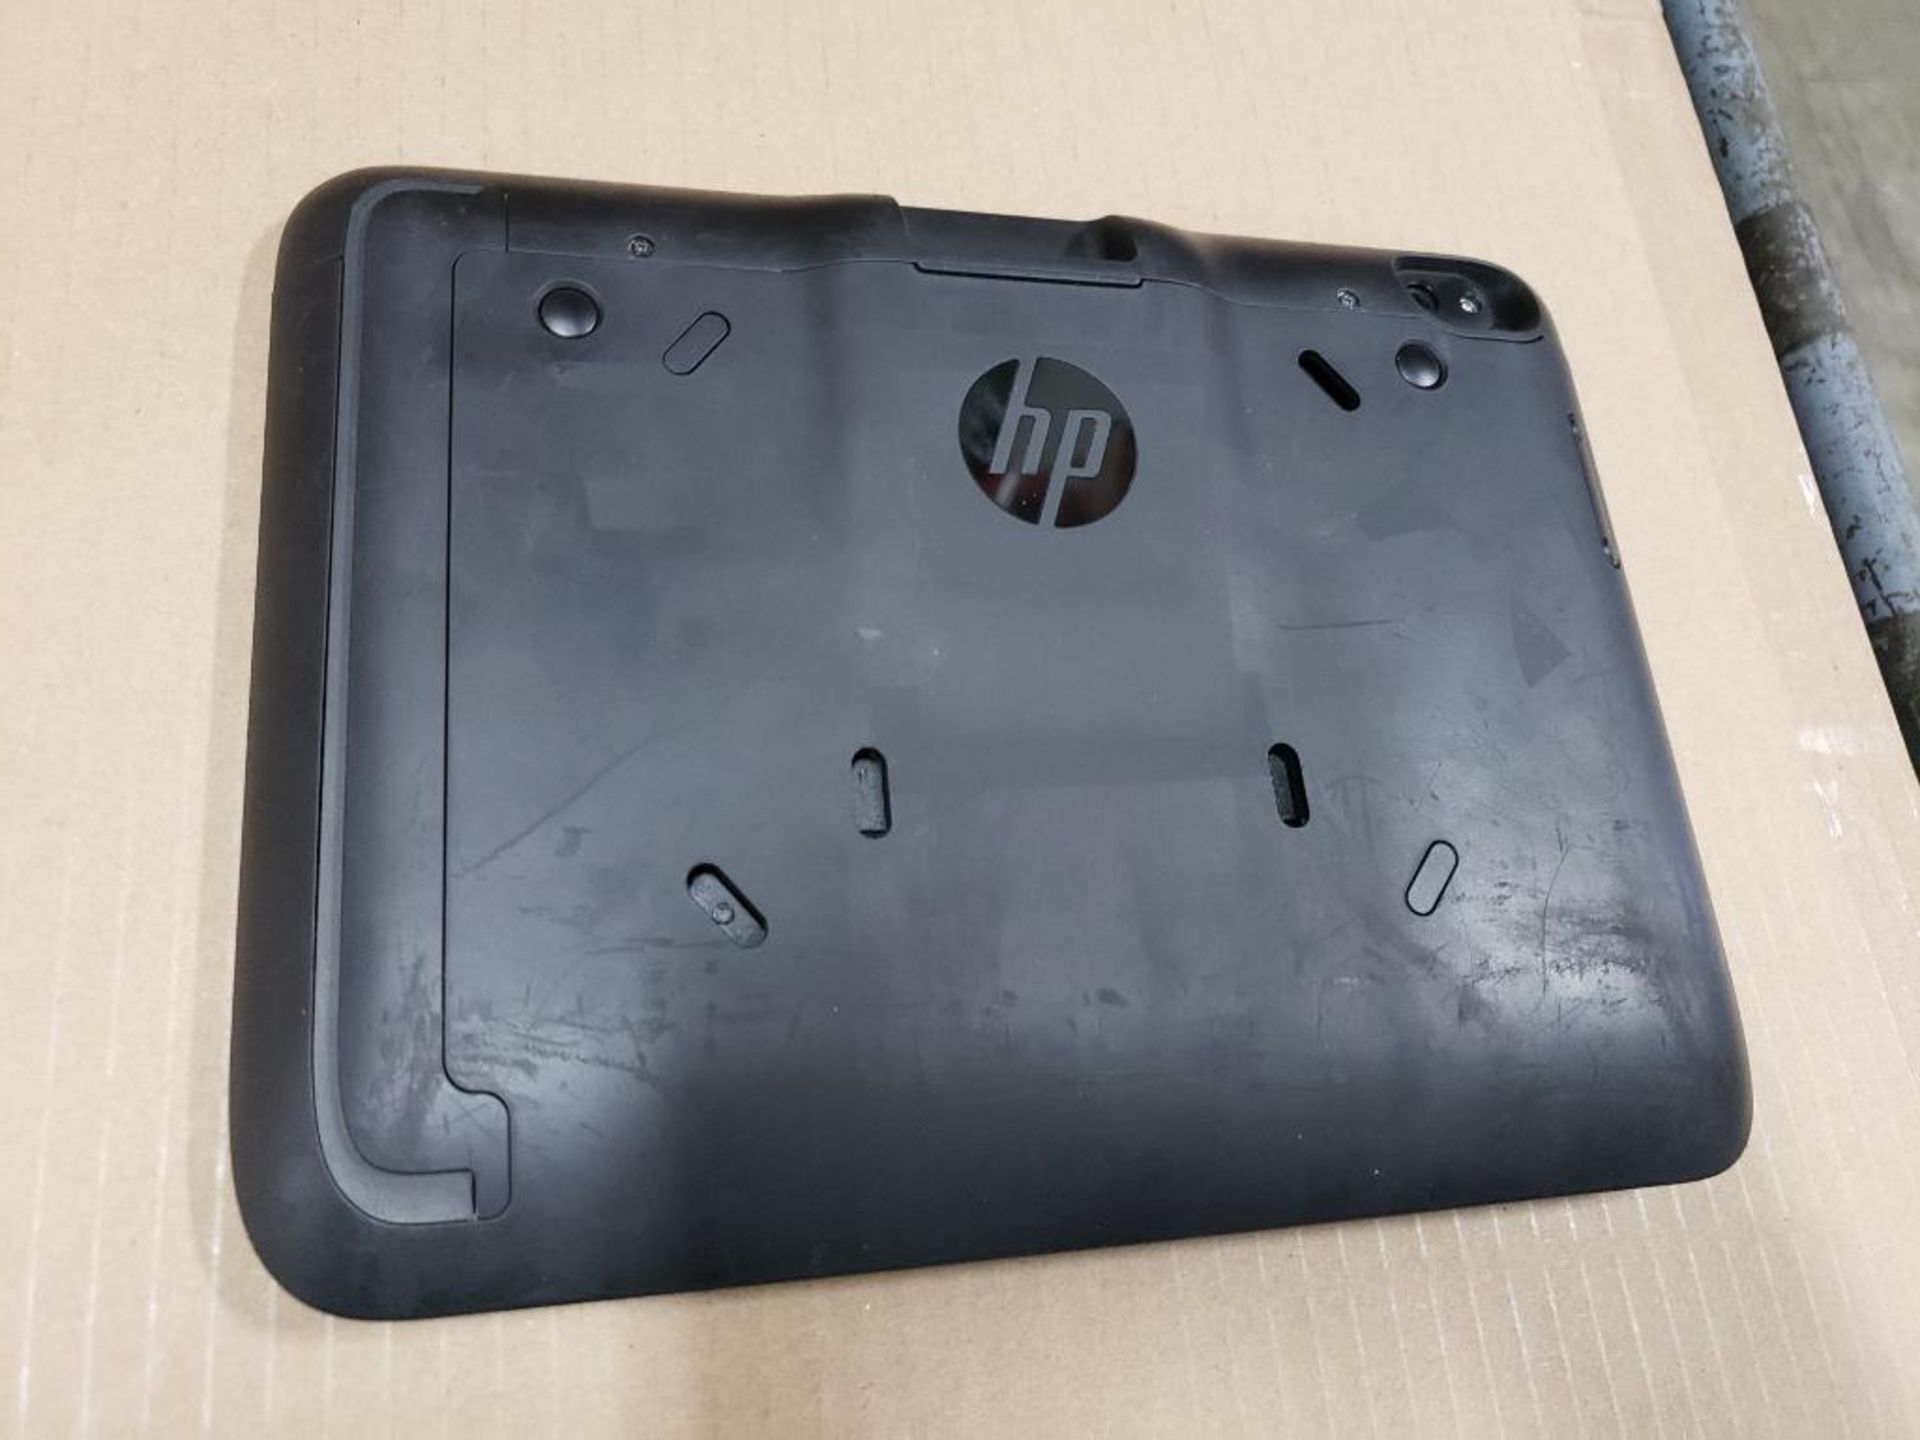 HP HSTNN-C75C Elite Pro 900 G1 10.1 tablet with case. - Image 5 of 6